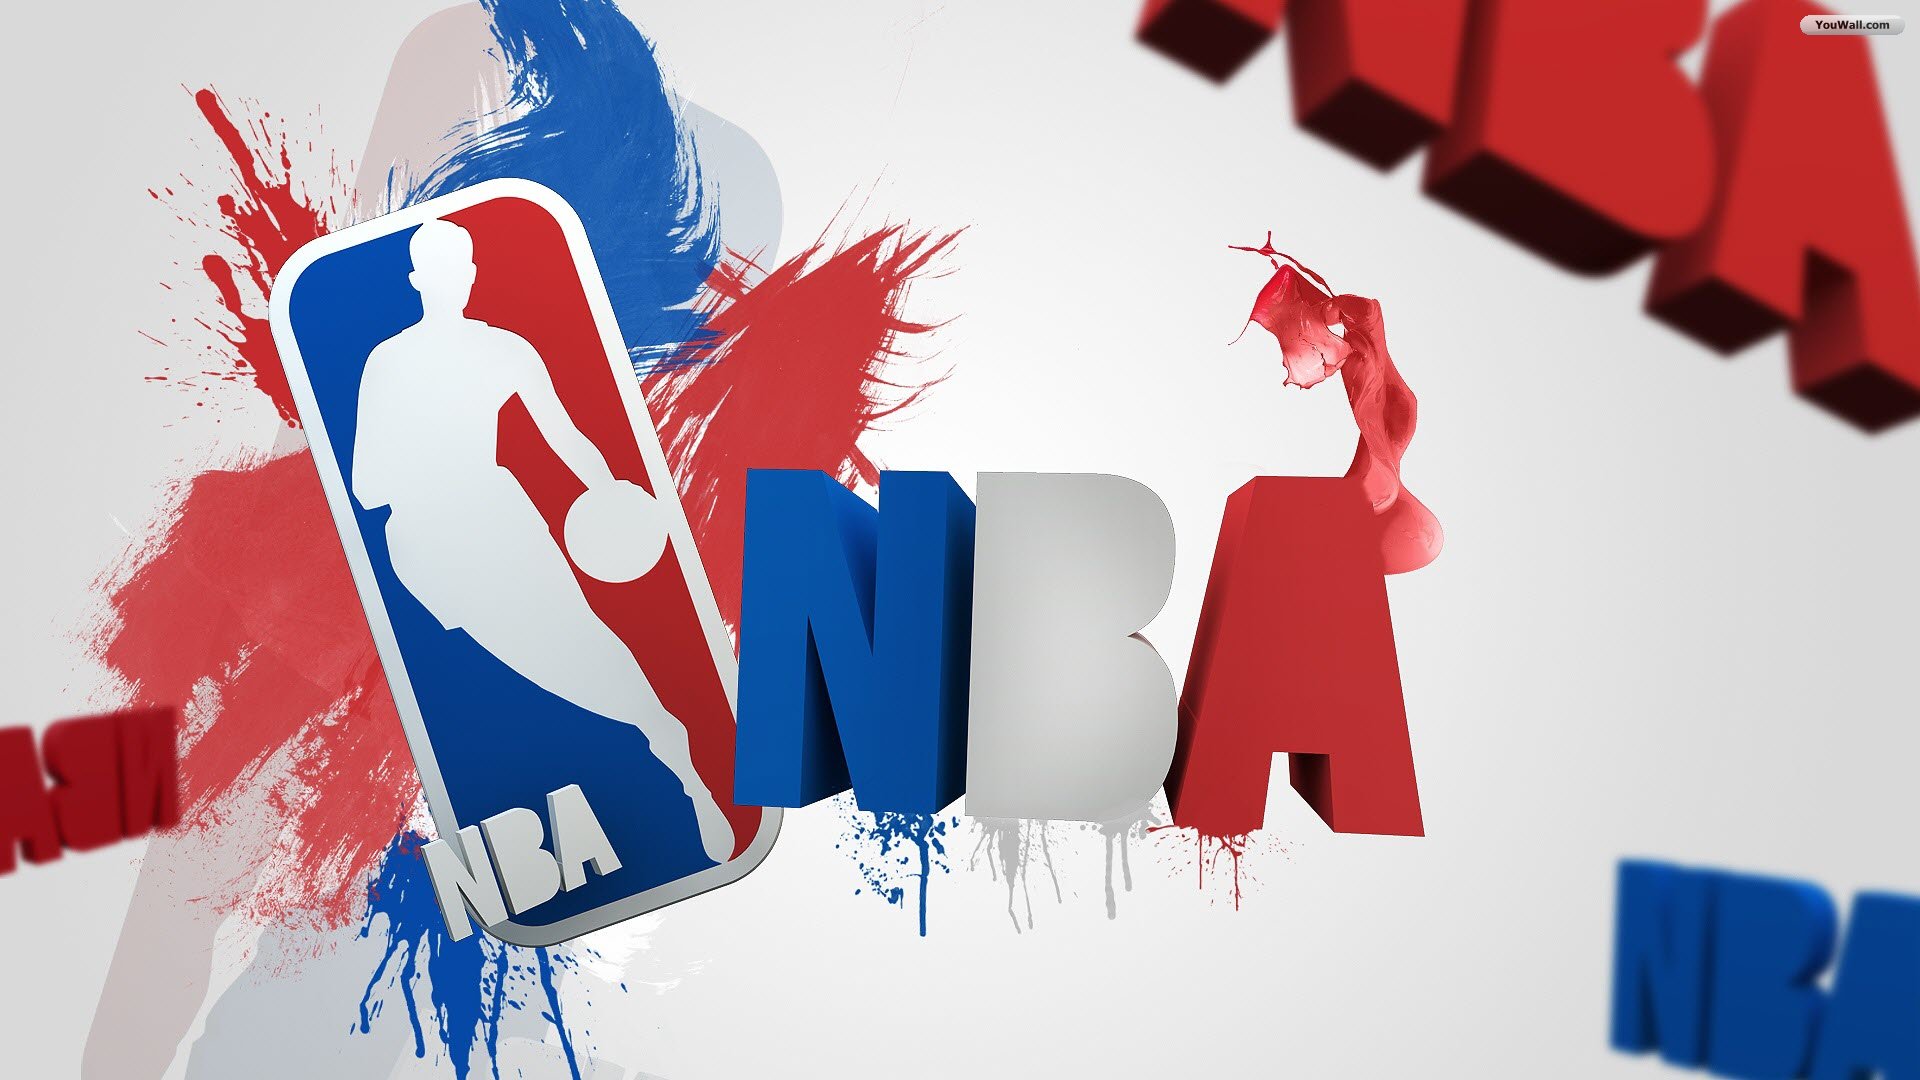 the national basketball association is cool whether it was dr j